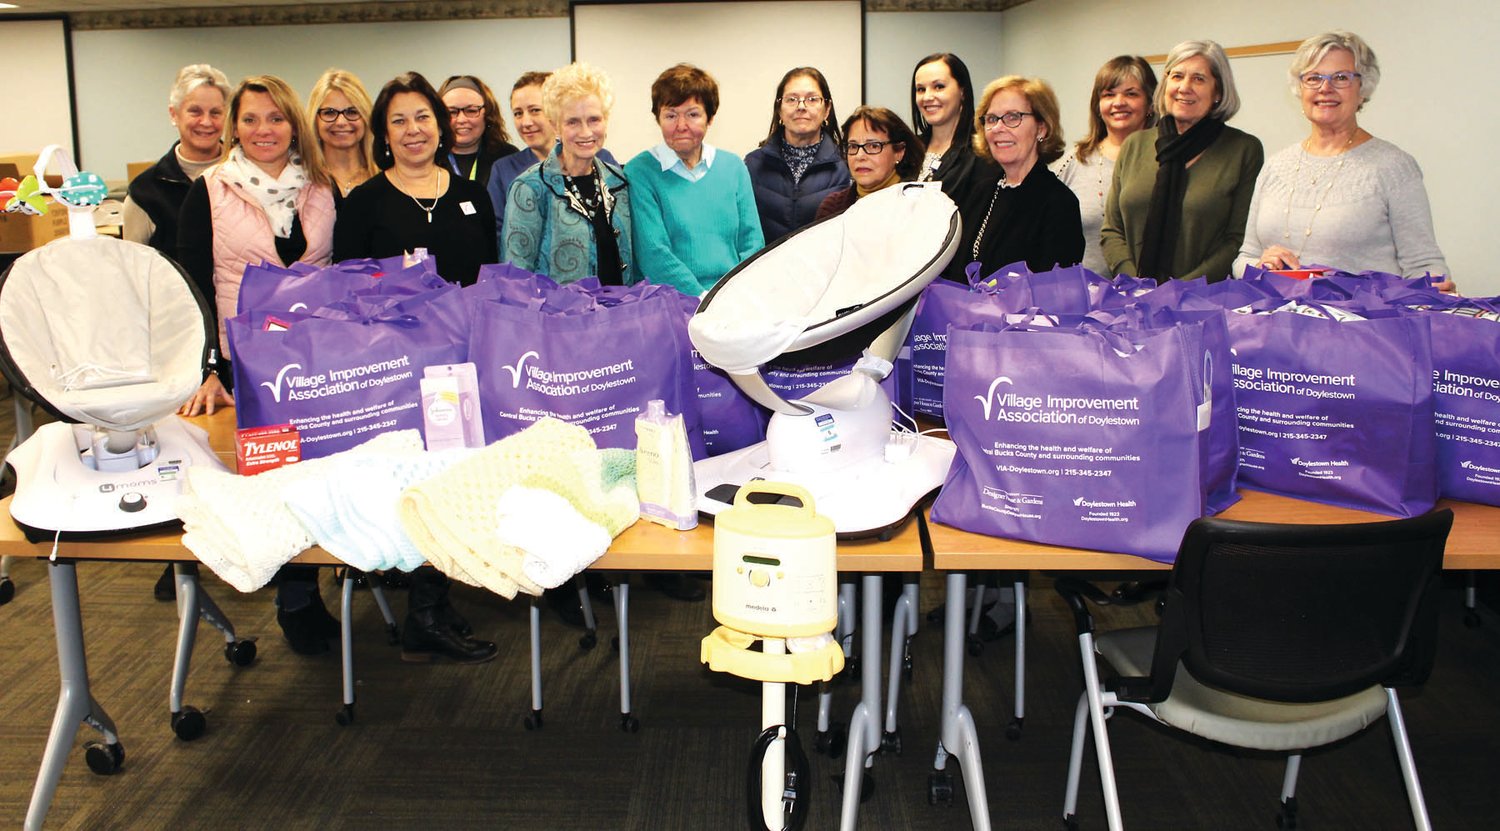 Members of the Village Improvement Association of Doylestown (VIA) recently assembled bags of essential baby items for parents of newborns with neonatal abstinence syndrome (NAS).